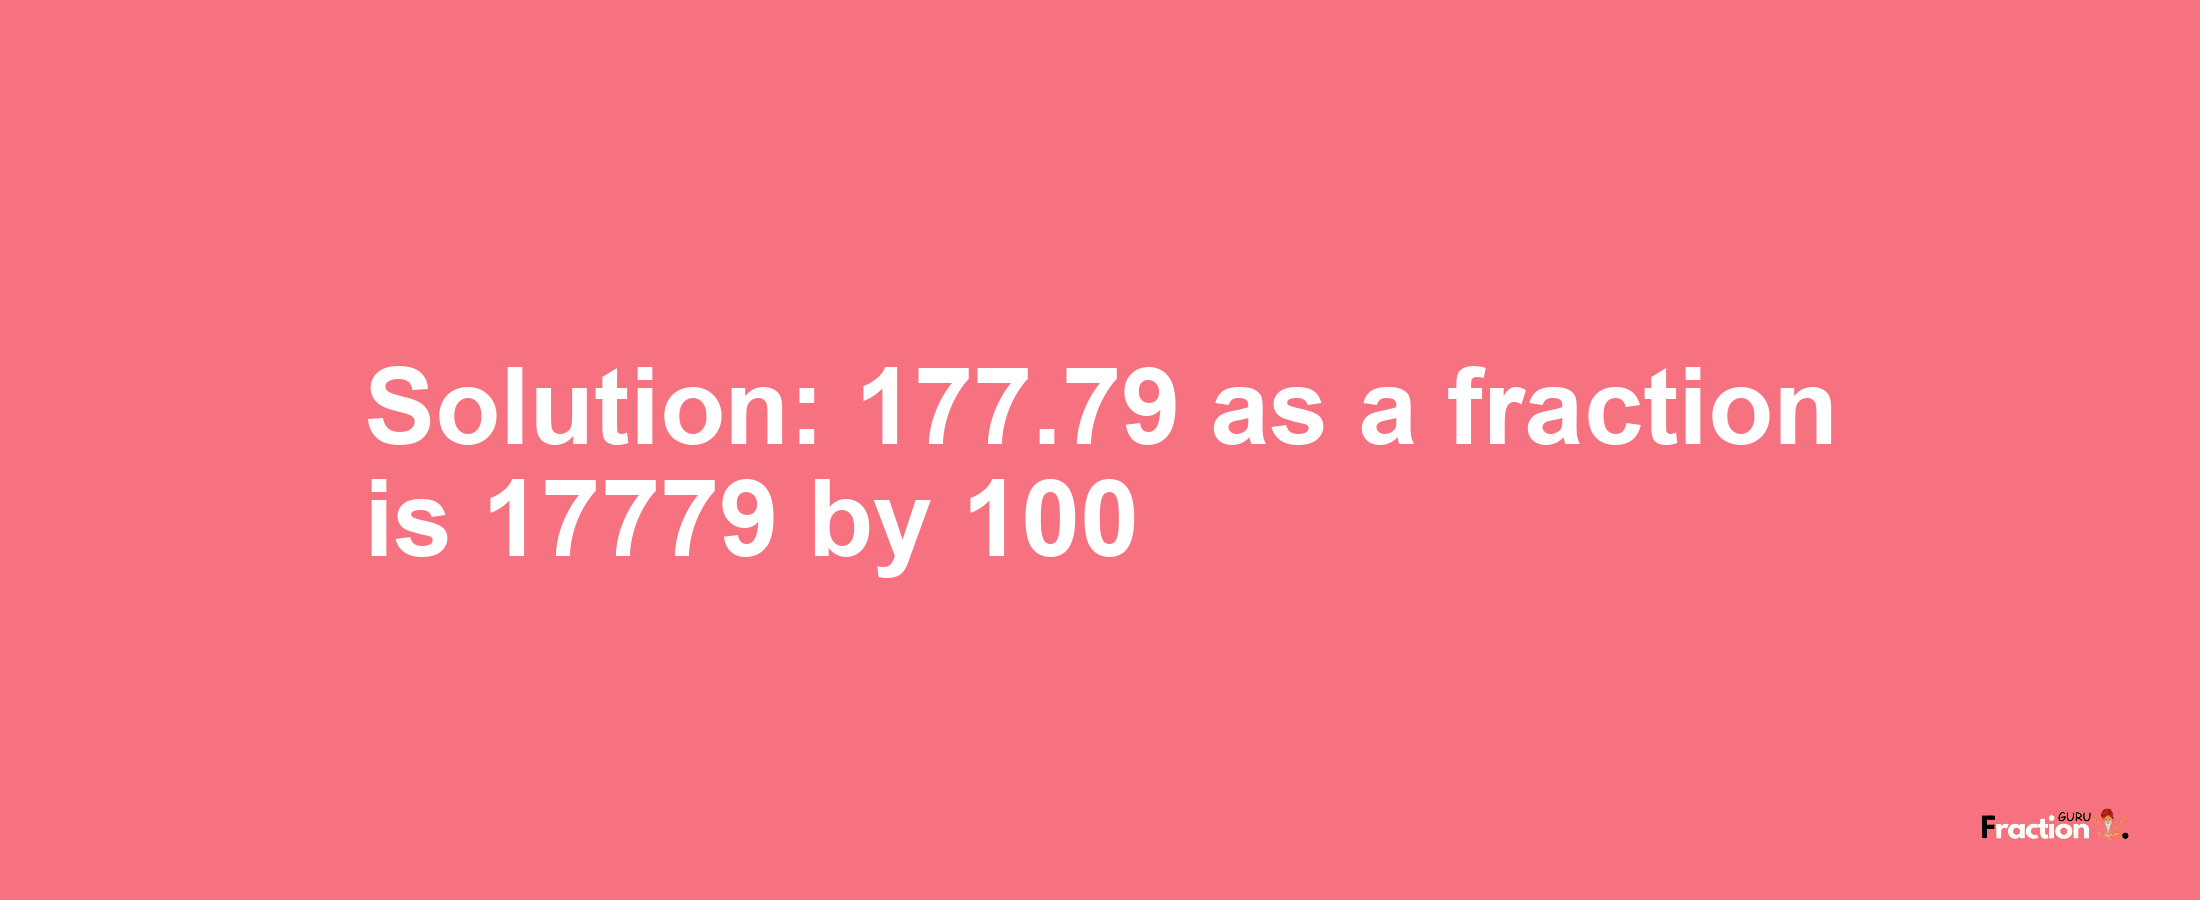 Solution:177.79 as a fraction is 17779/100